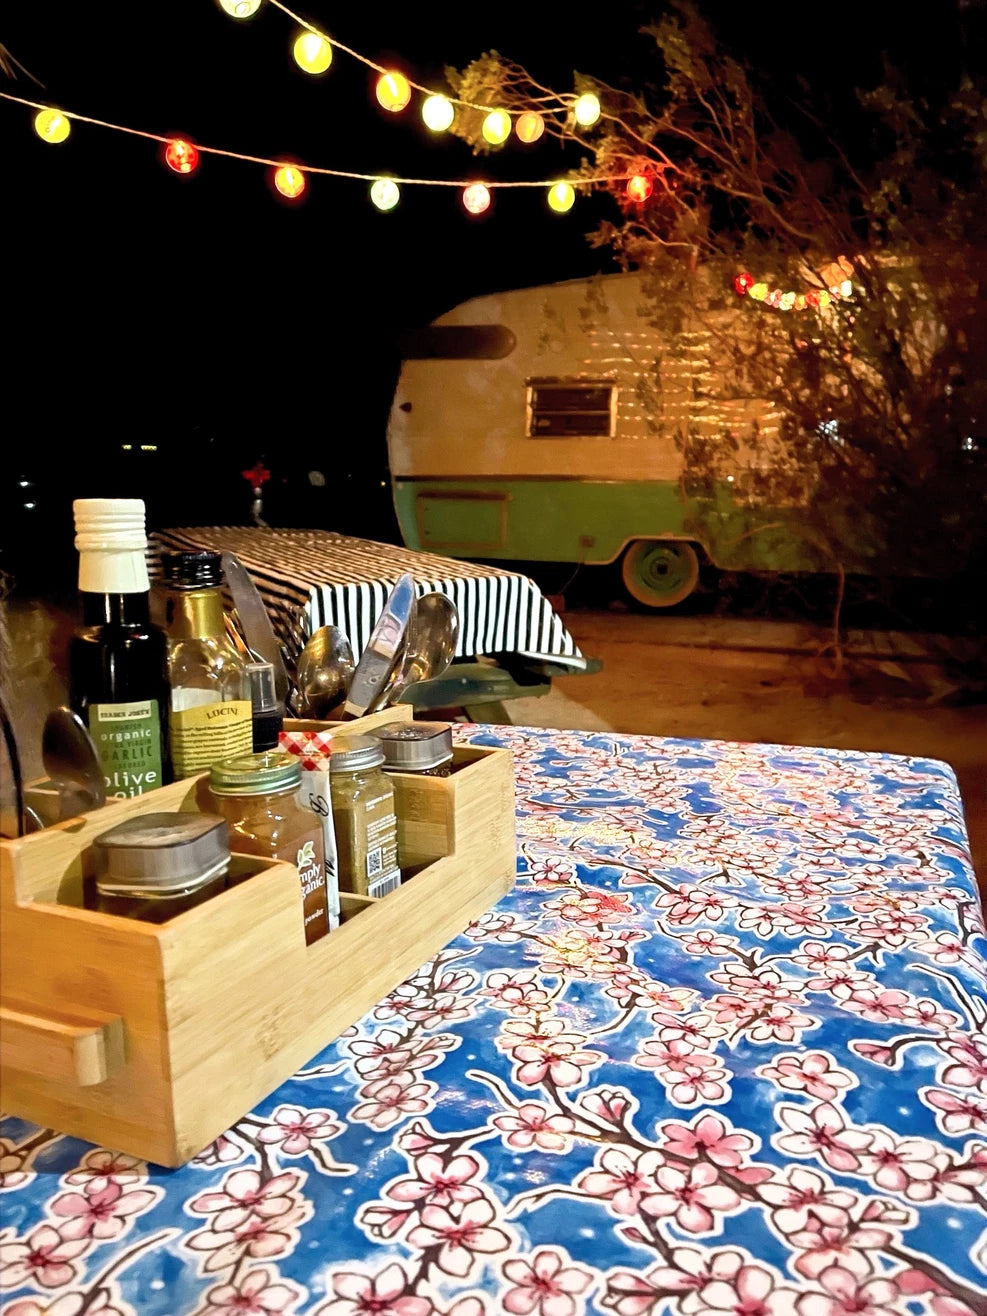 Brighten up your campsite with a LITOCLOTH and outdoor lights